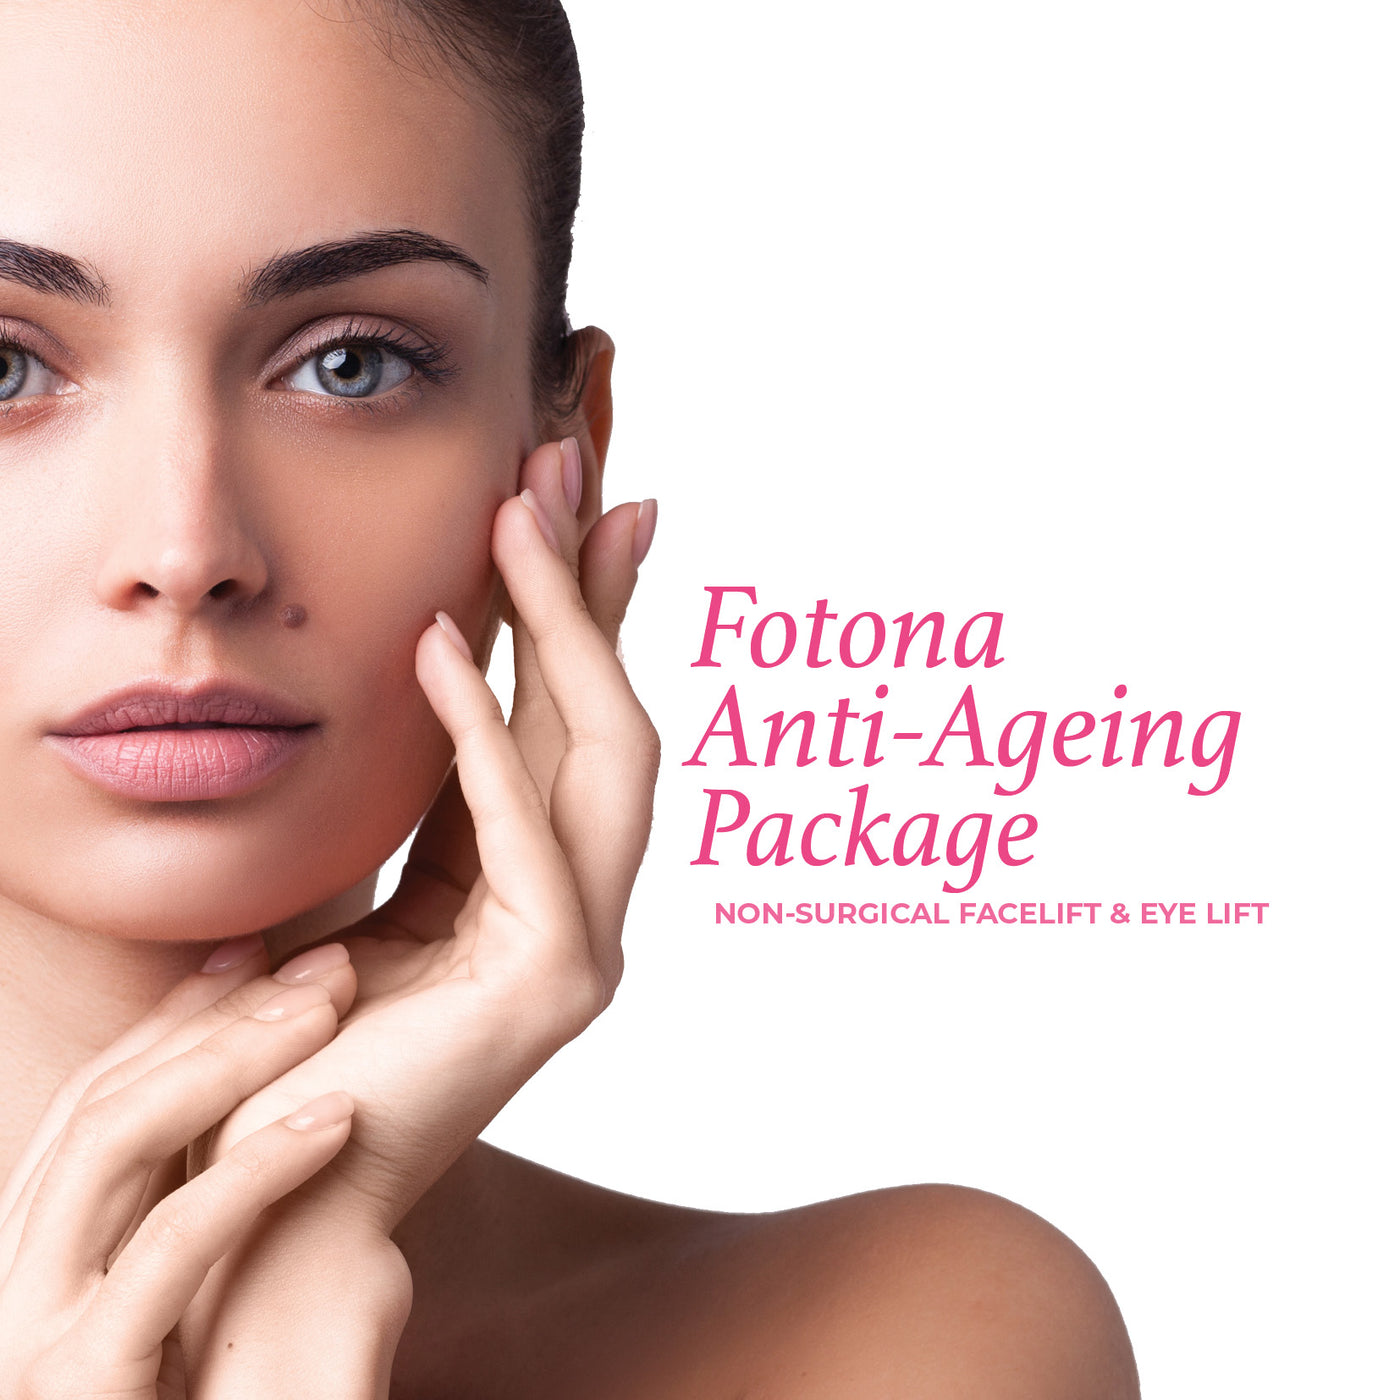 Anti-Ageing Package - Non-Surgical Face Lift & Eye Lift